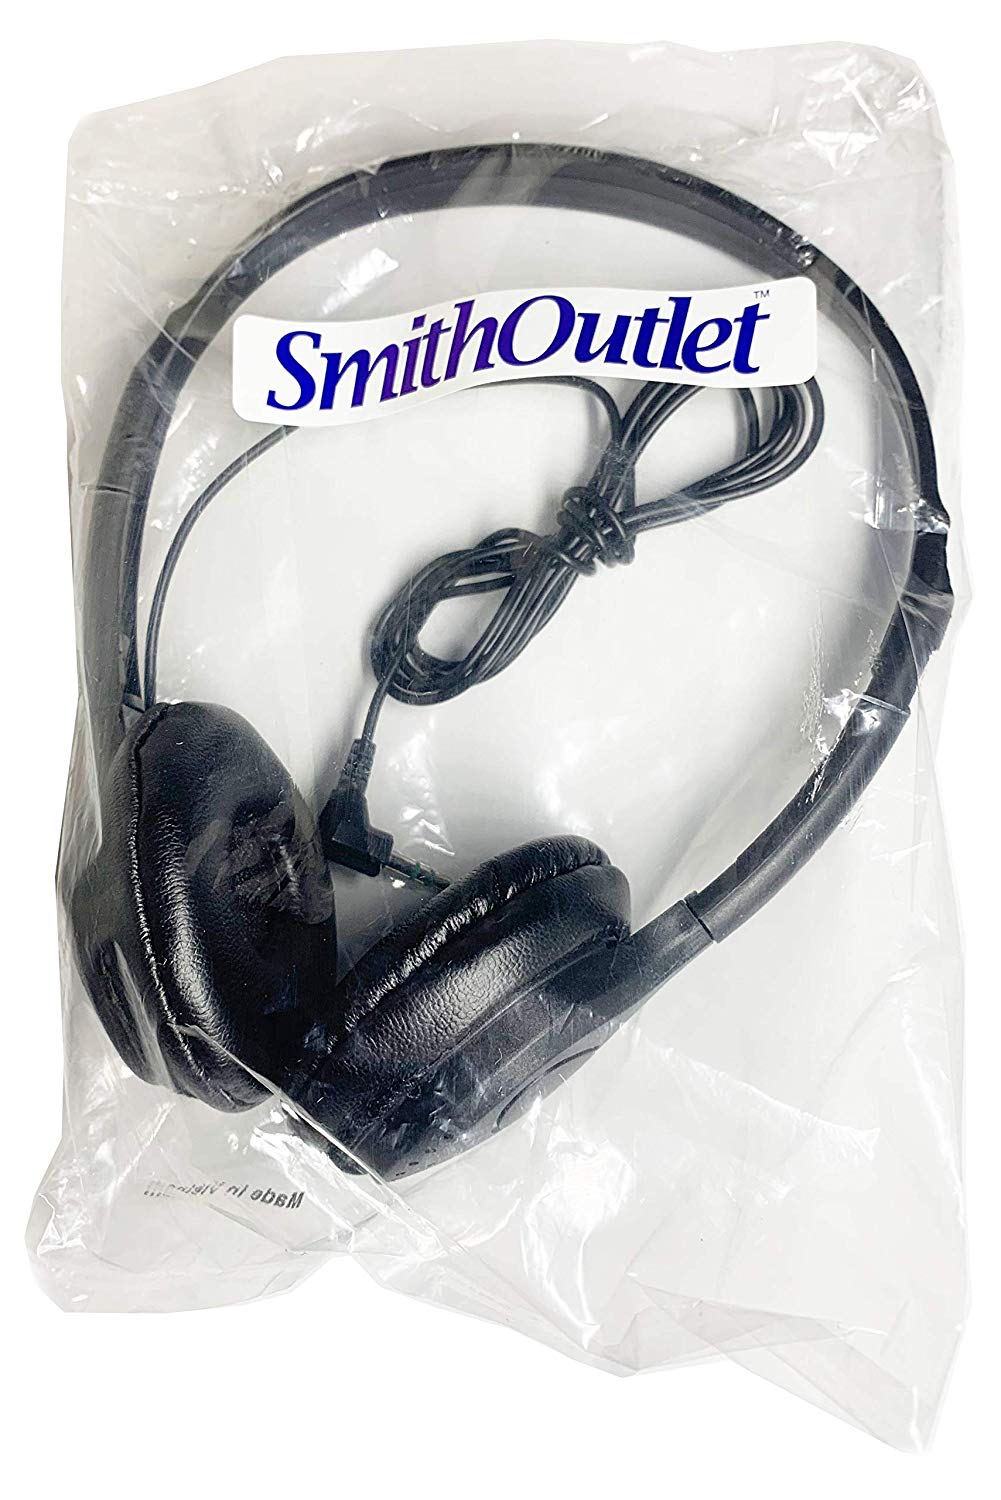 Individually Packaged SmithOutlet Headphones Ready for Distribution in Schools and Clinics